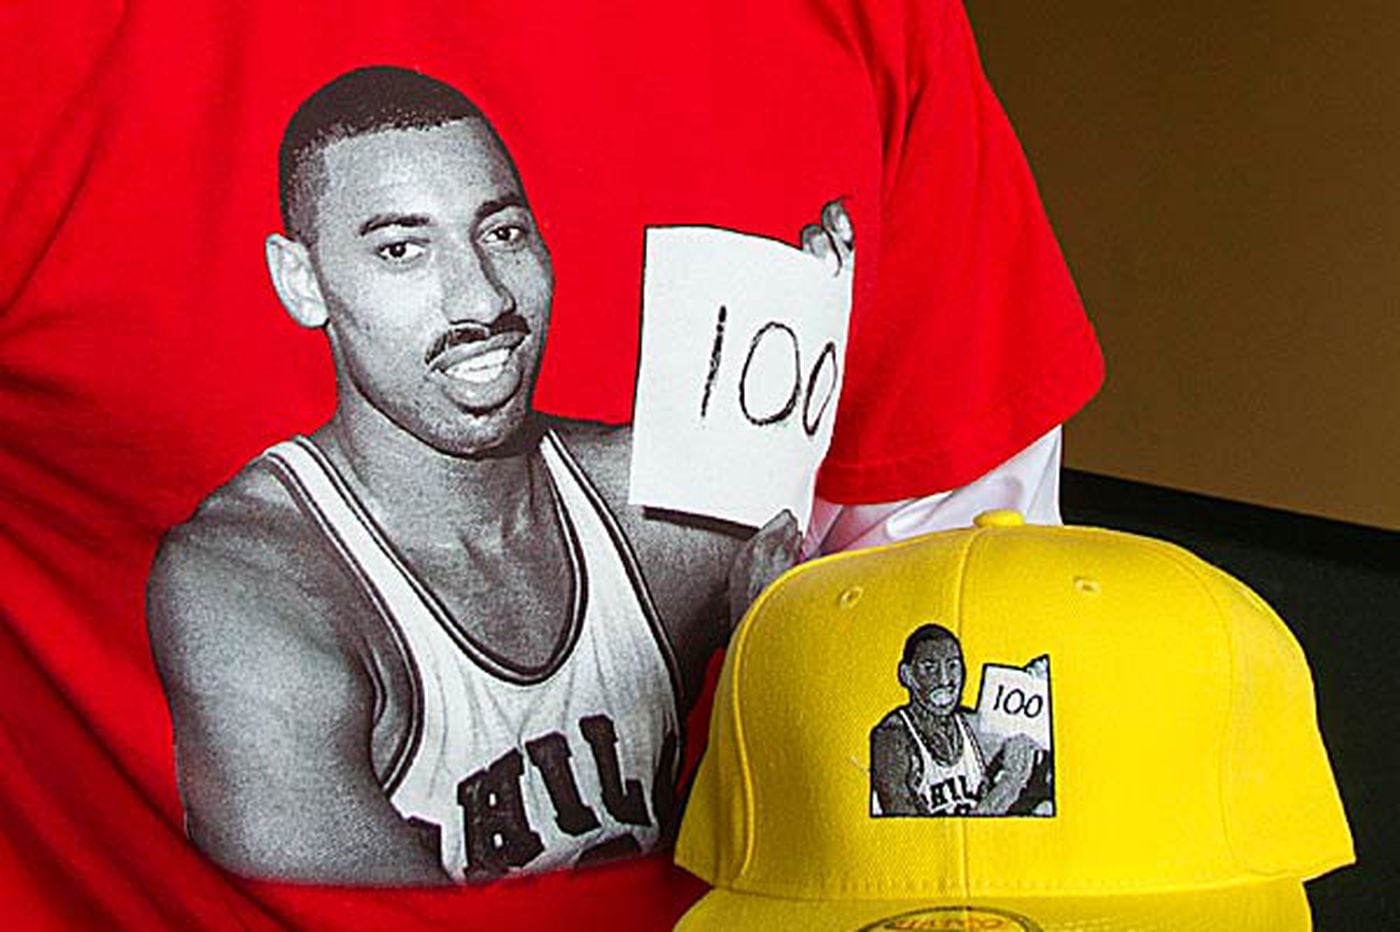 Line Of Wilt Chamberlain Apparel Aims To Cash In On His Outsize Legend